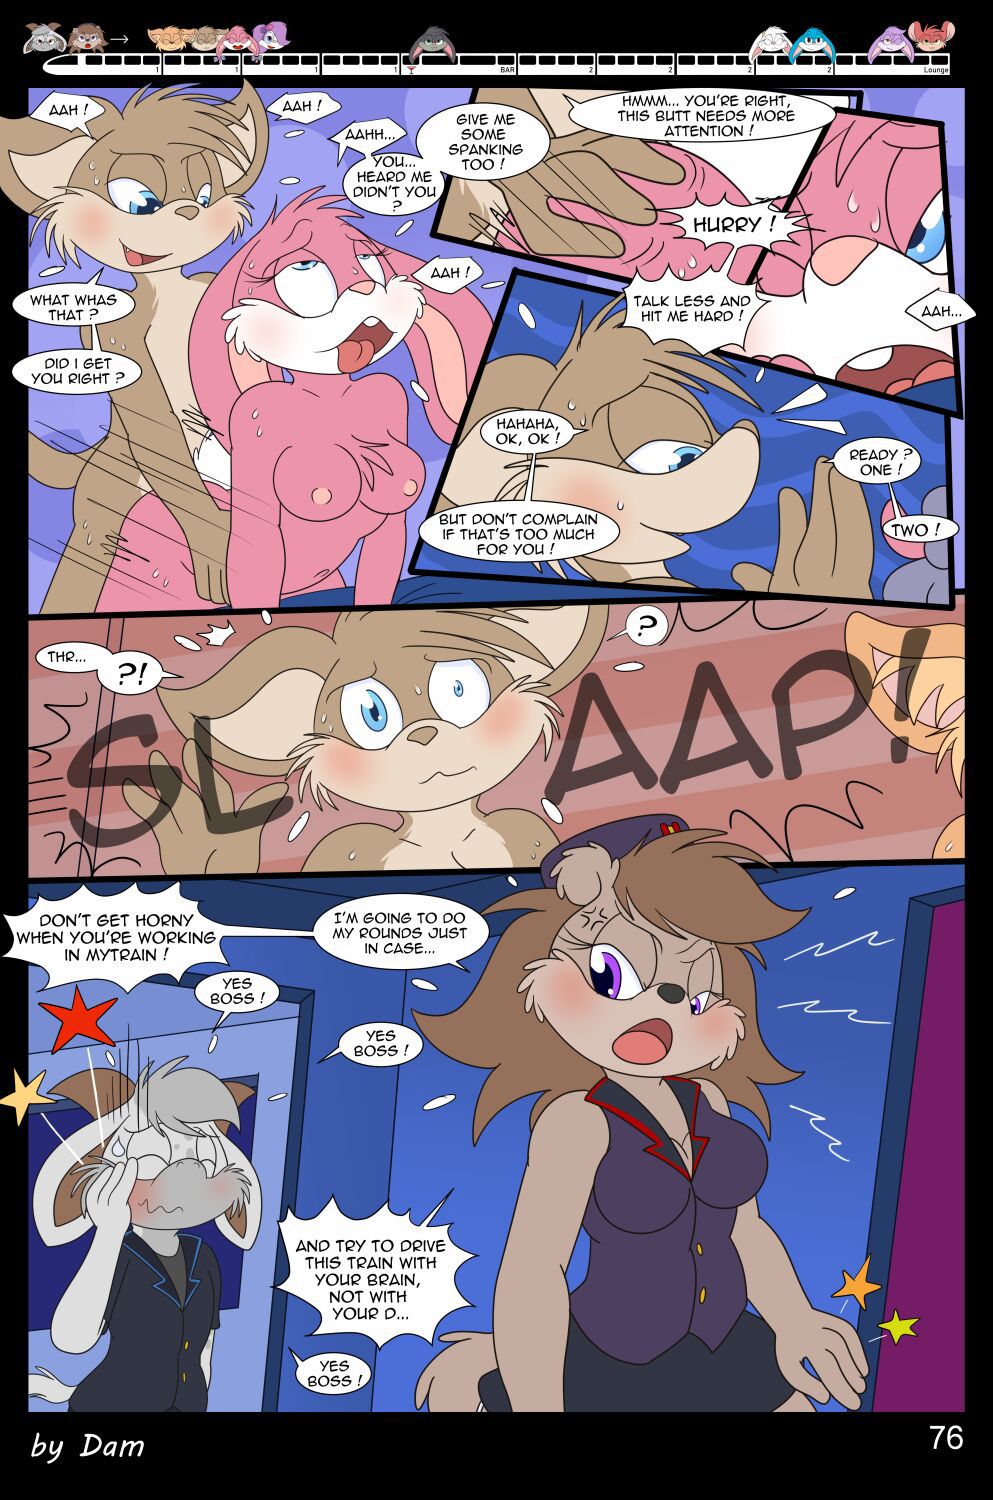 [Dam] Toons on a train [Ongoing] 76